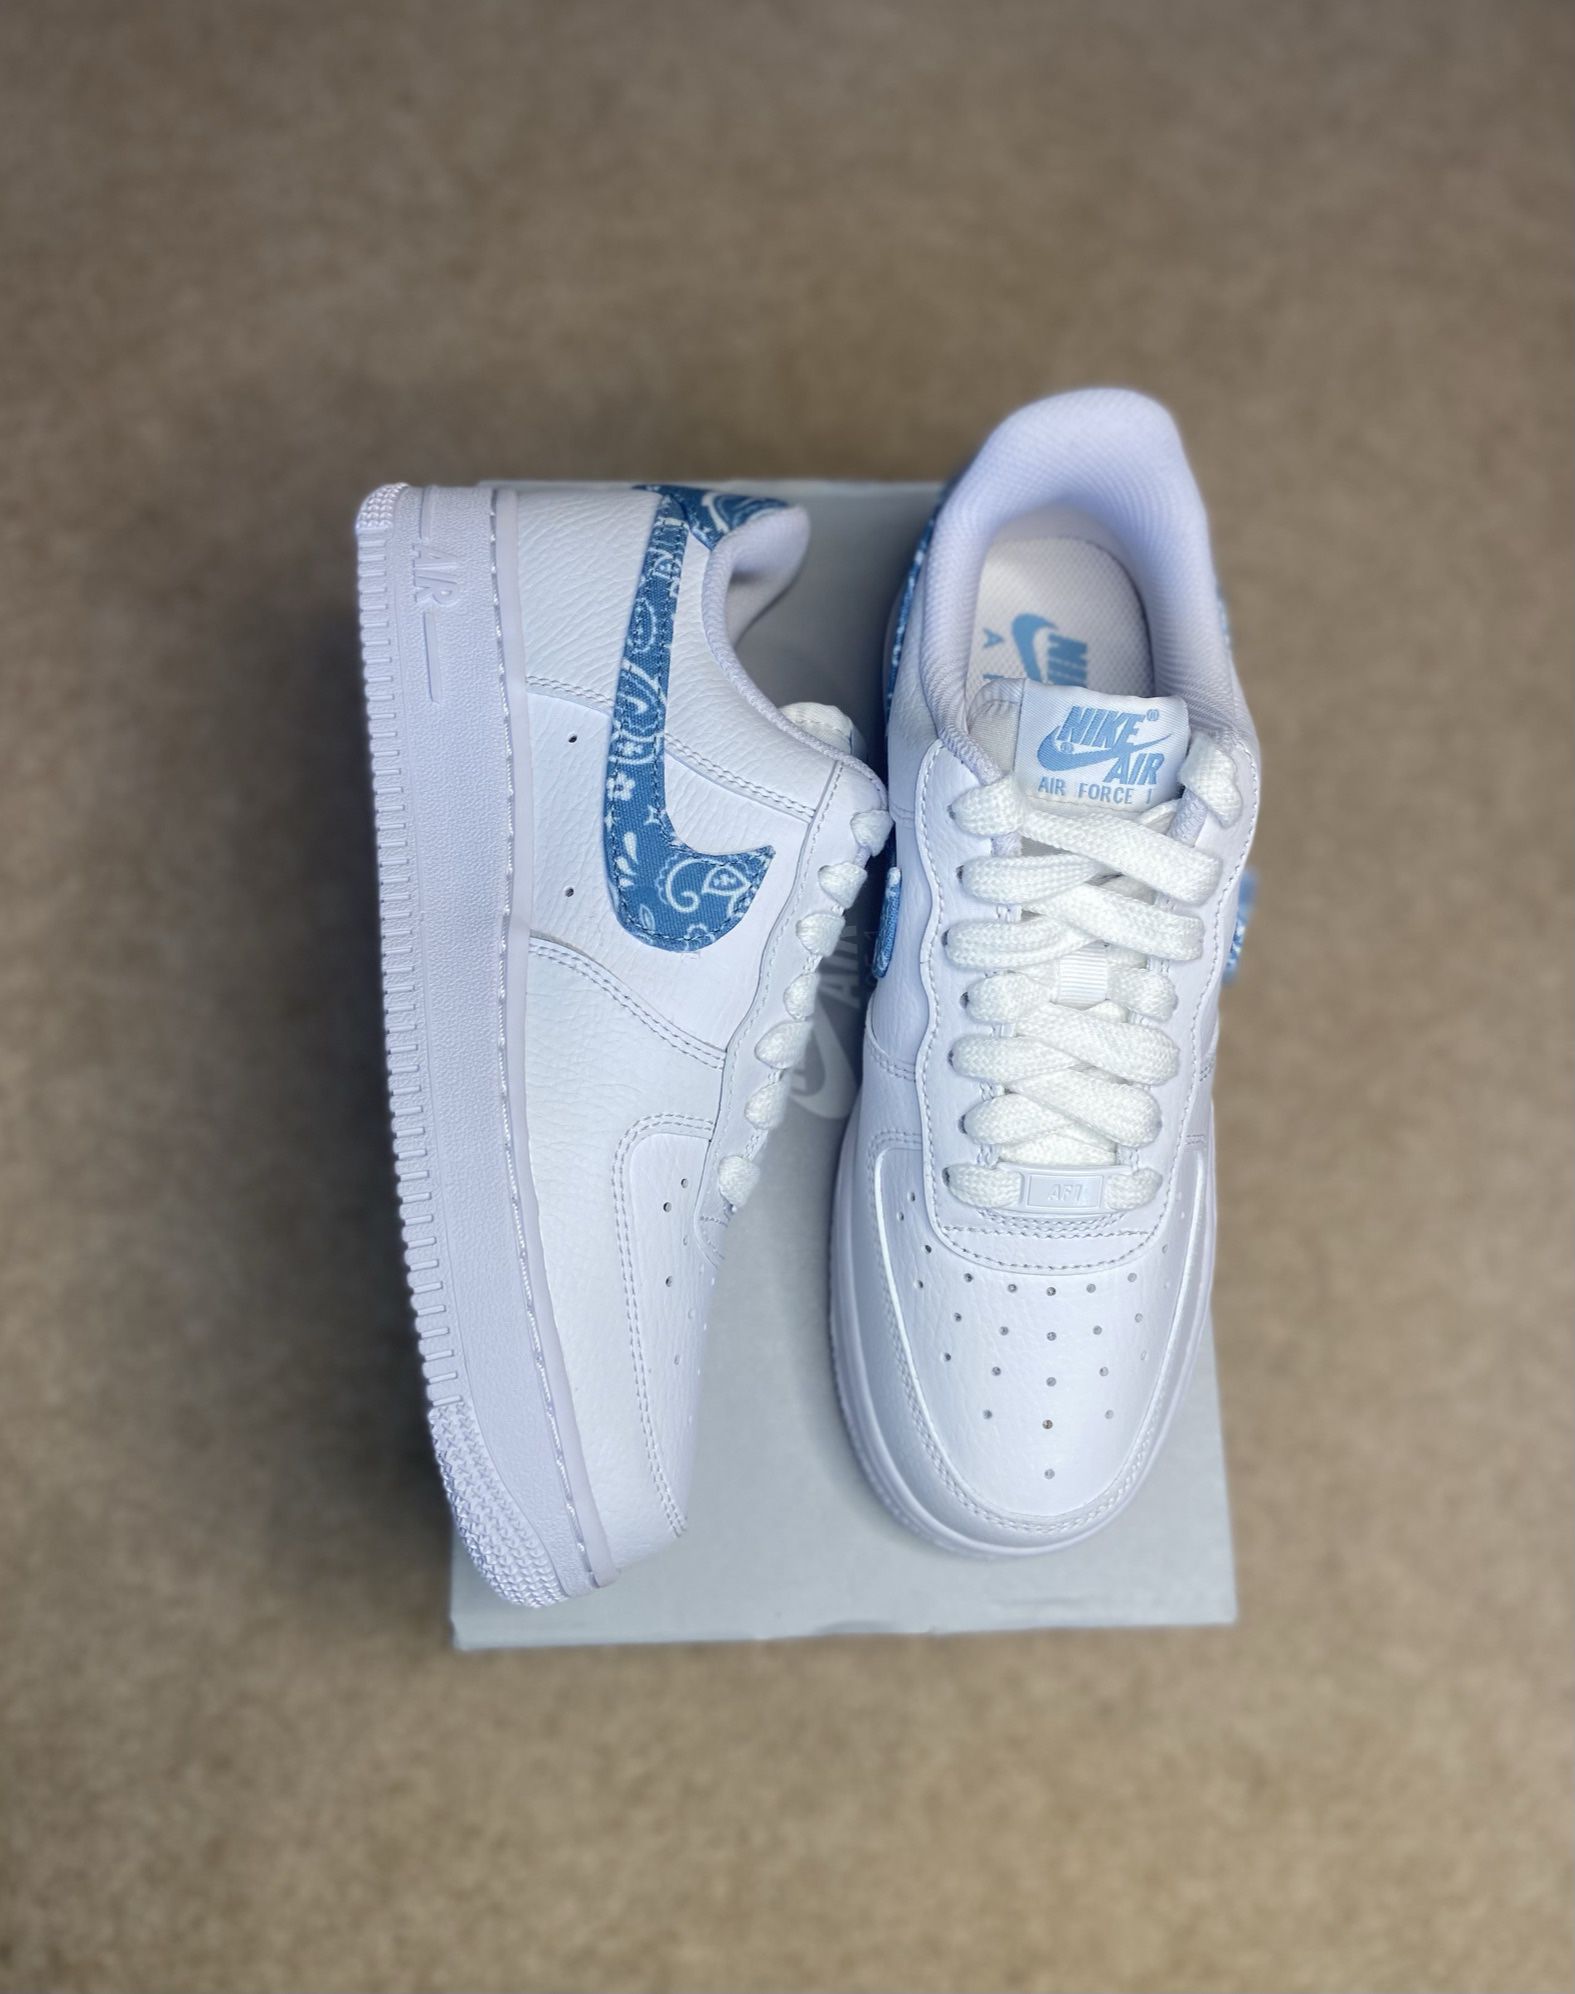 Air Force 1 07 LV8 EMB for Sale in Spring Lake, NC - OfferUp